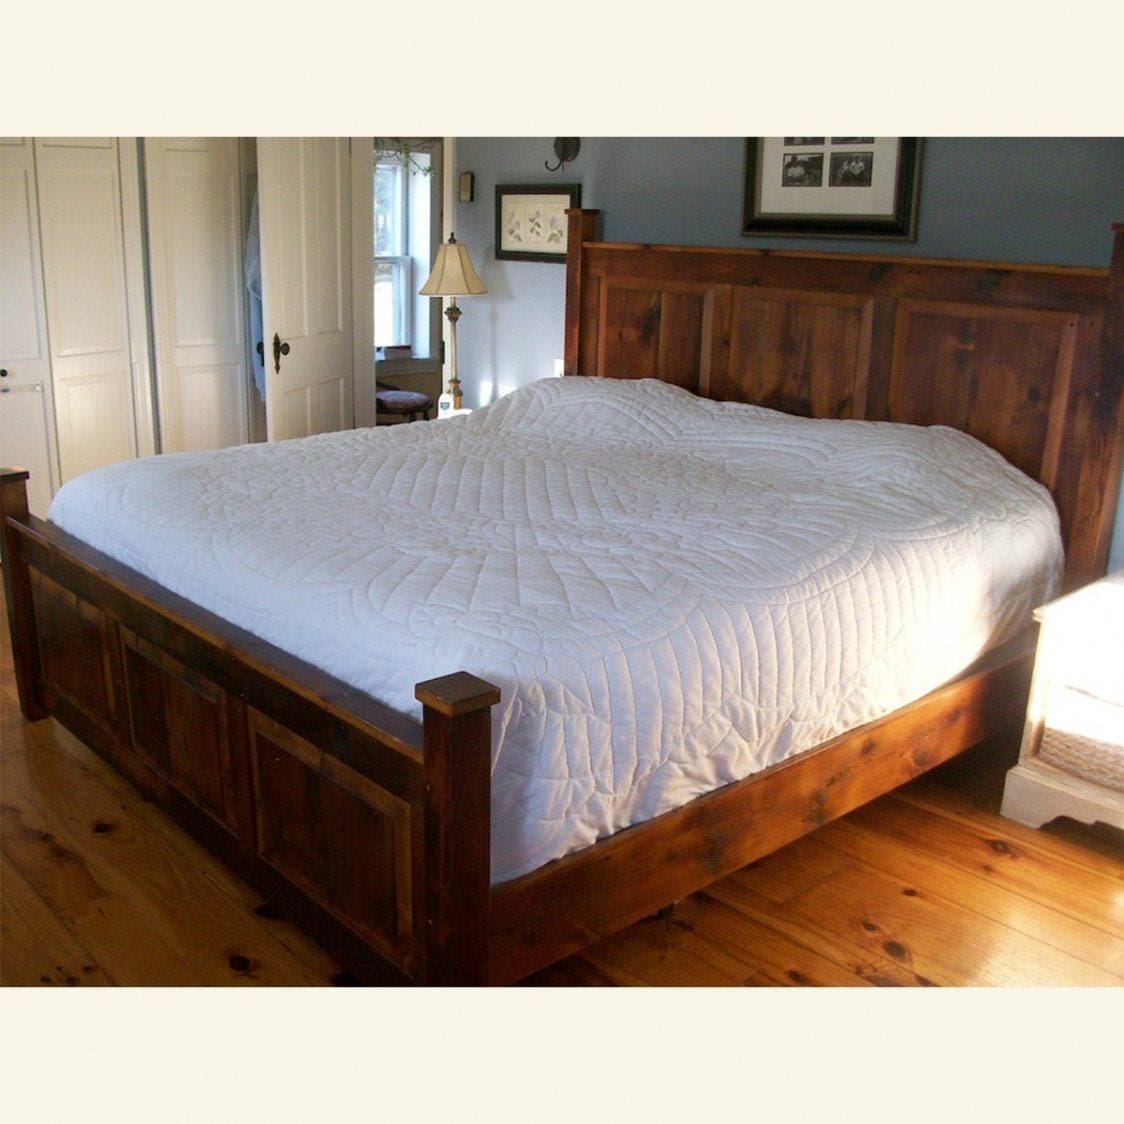 king-size-bed-set-with-Raised-panelsq